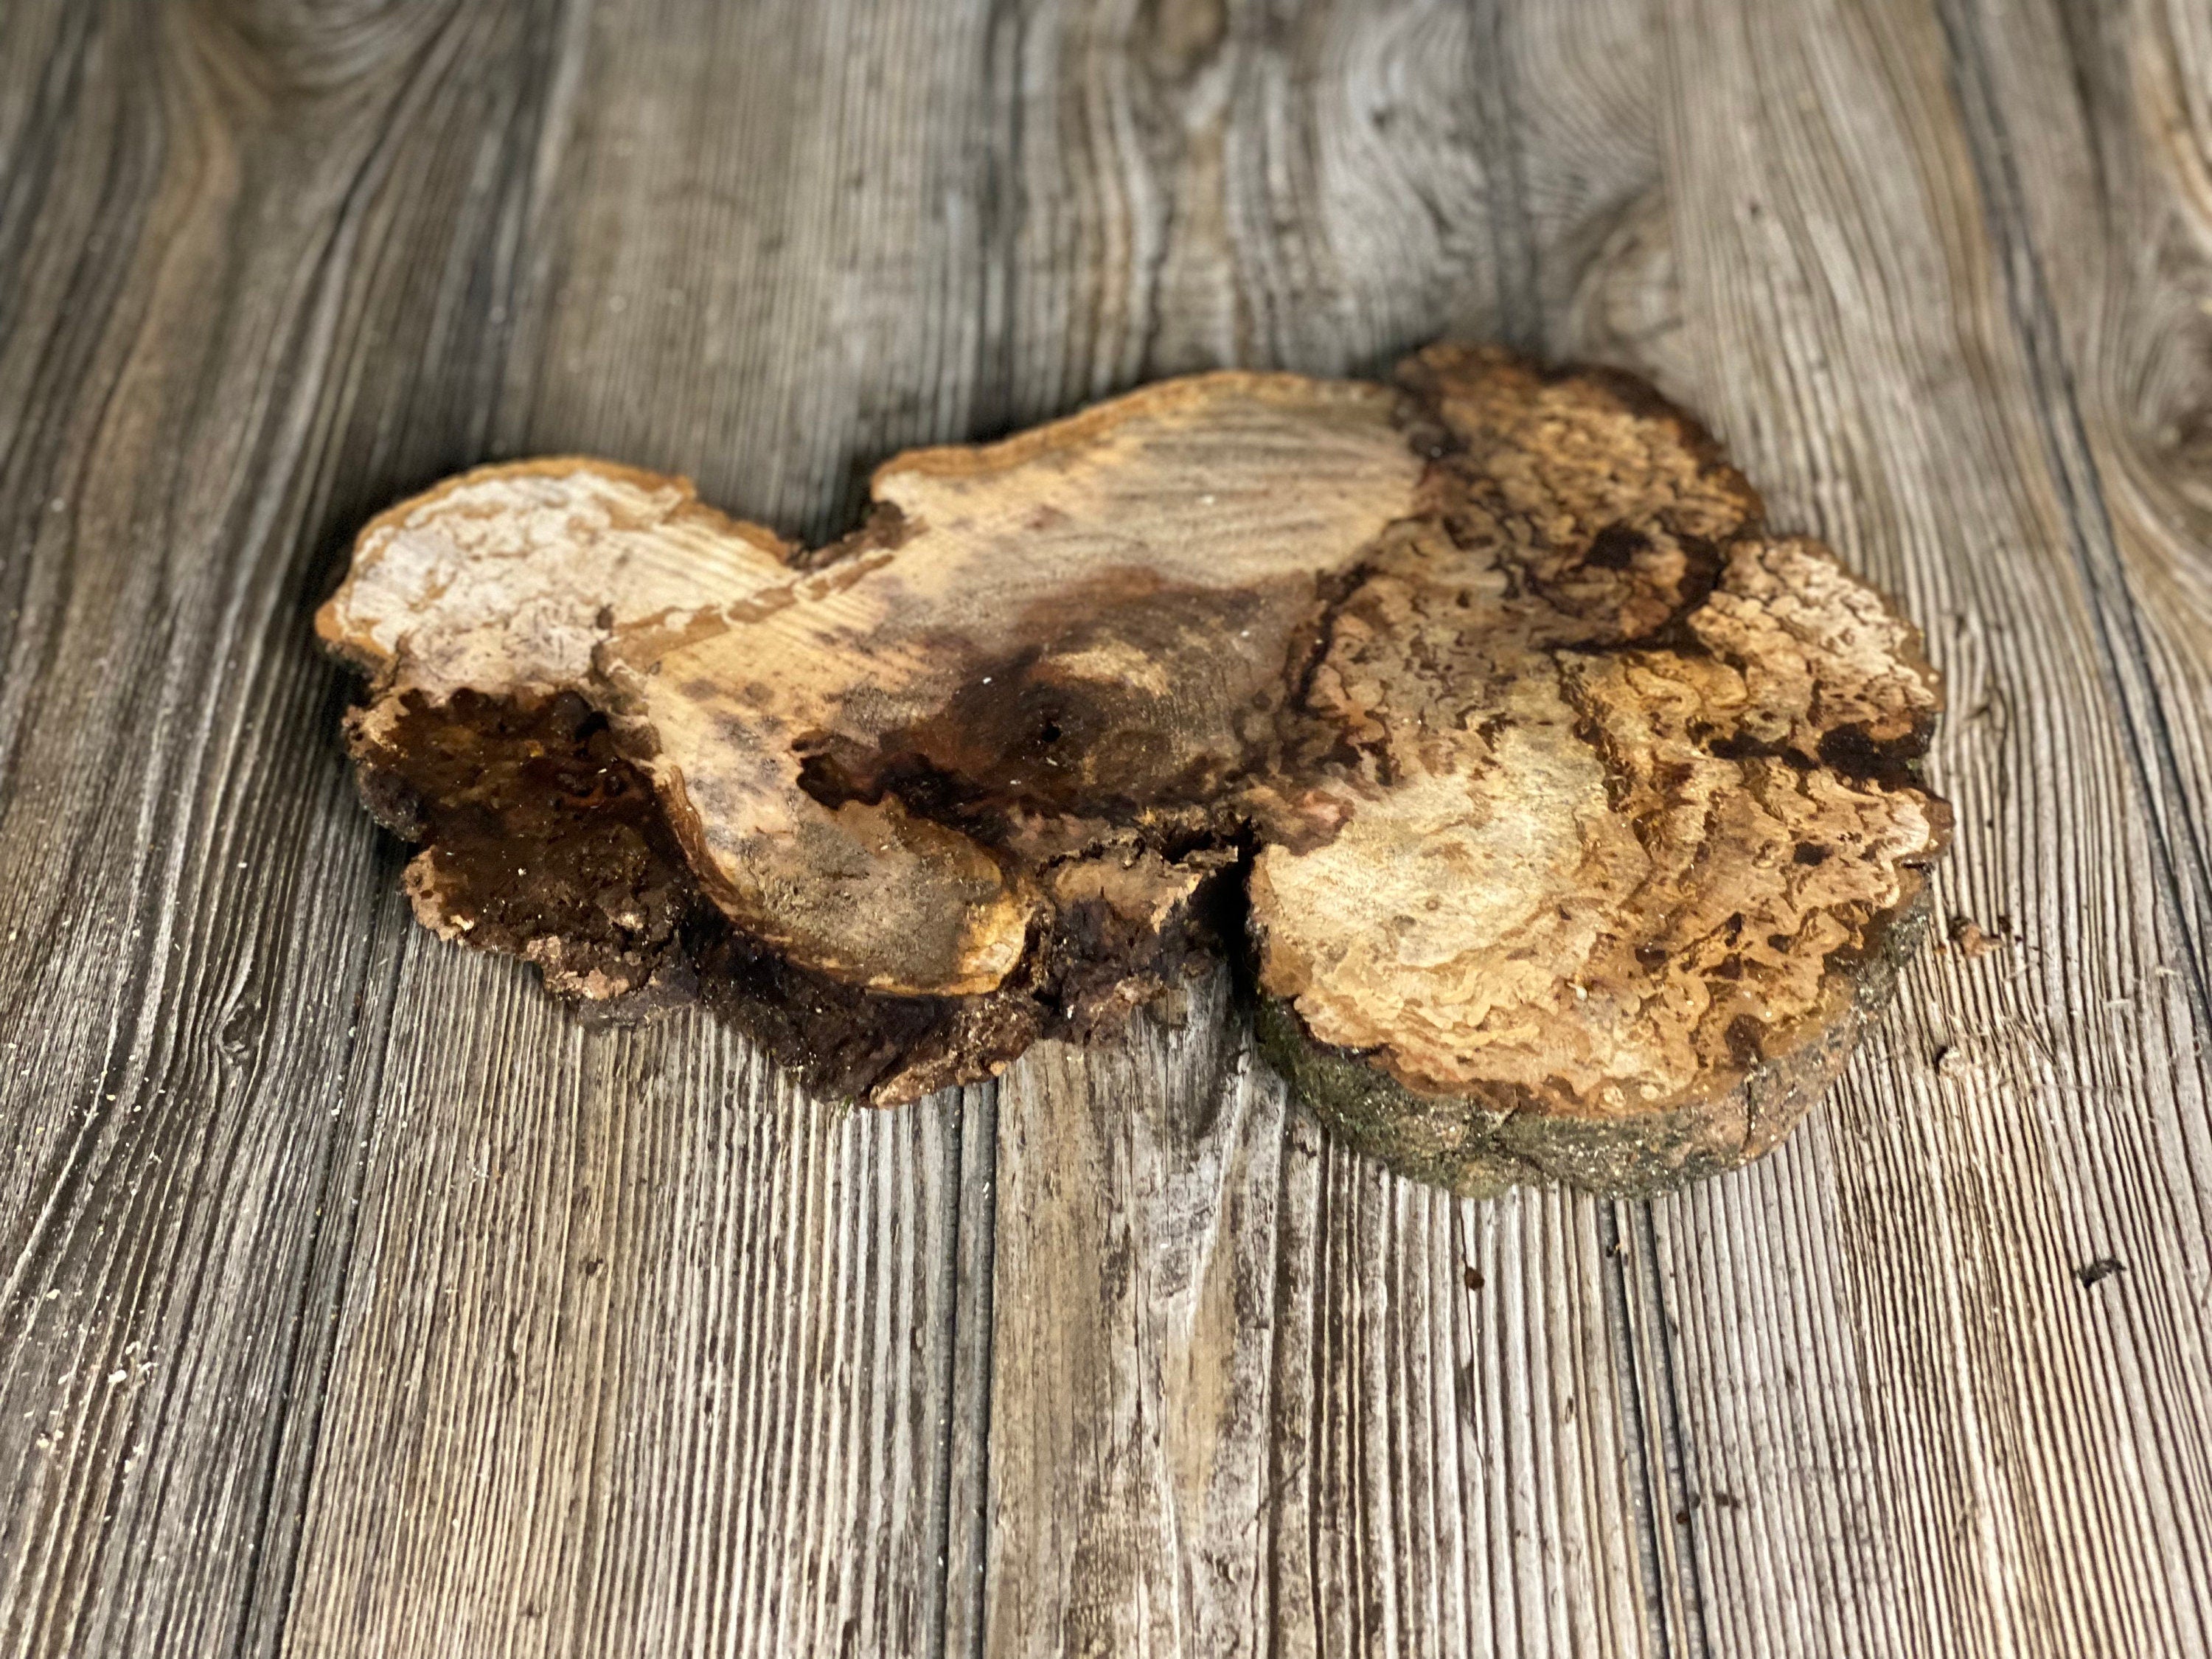 Hickory Burl Slice, Approximately 11 Inches Long by 7 Inches Wide and 3/4 Inch Thick